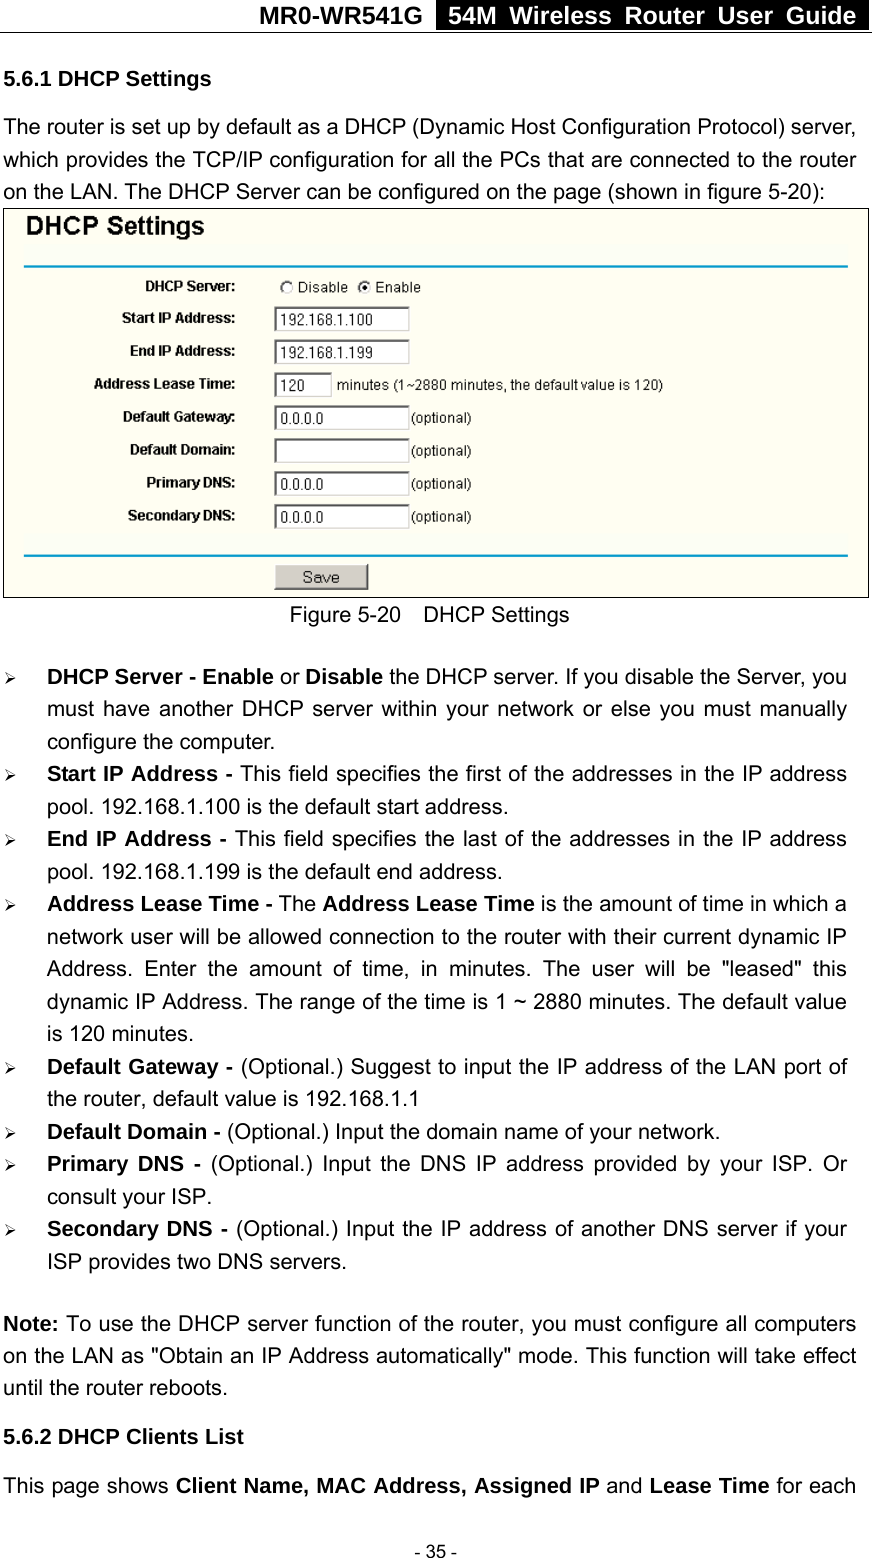 MR0-WR541G   54M Wireless Router User Guide  5.6.1 DHCP Settings The router is set up by default as a DHCP (Dynamic Host Configuration Protocol) server, which provides the TCP/IP configuration for all the PCs that are connected to the router on the LAN. The DHCP Server can be configured on the page (shown in figure 5-20):  Figure 5-20  DHCP Settings ¾ DHCP Server - Enable or Disable the DHCP server. If you disable the Server, you must have another DHCP server within your network or else you must manually configure the computer. ¾ Start IP Address - This field specifies the first of the addresses in the IP address pool. 192.168.1.100 is the default start address. ¾ End IP Address - This field specifies the last of the addresses in the IP address pool. 192.168.1.199 is the default end address. ¾ Address Lease Time - The Address Lease Time is the amount of time in which a network user will be allowed connection to the router with their current dynamic IP Address. Enter the amount of time, in minutes. The user will be &quot;leased&quot; this dynamic IP Address. The range of the time is 1 ~ 2880 minutes. The default value is 120 minutes. ¾ Default Gateway - (Optional.) Suggest to input the IP address of the LAN port of the router, default value is 192.168.1.1 ¾ Default Domain - (Optional.) Input the domain name of your network. ¾ Primary DNS - (Optional.) Input the DNS IP address provided by your ISP. Or consult your ISP. ¾ Secondary DNS - (Optional.) Input the IP address of another DNS server if your ISP provides two DNS servers. Note: To use the DHCP server function of the router, you must configure all computers on the LAN as &quot;Obtain an IP Address automatically&quot; mode. This function will take effect until the router reboots. 5.6.2 DHCP Clients List This page shows Client Name, MAC Address, Assigned IP and Lease Time for each  - 35 - 